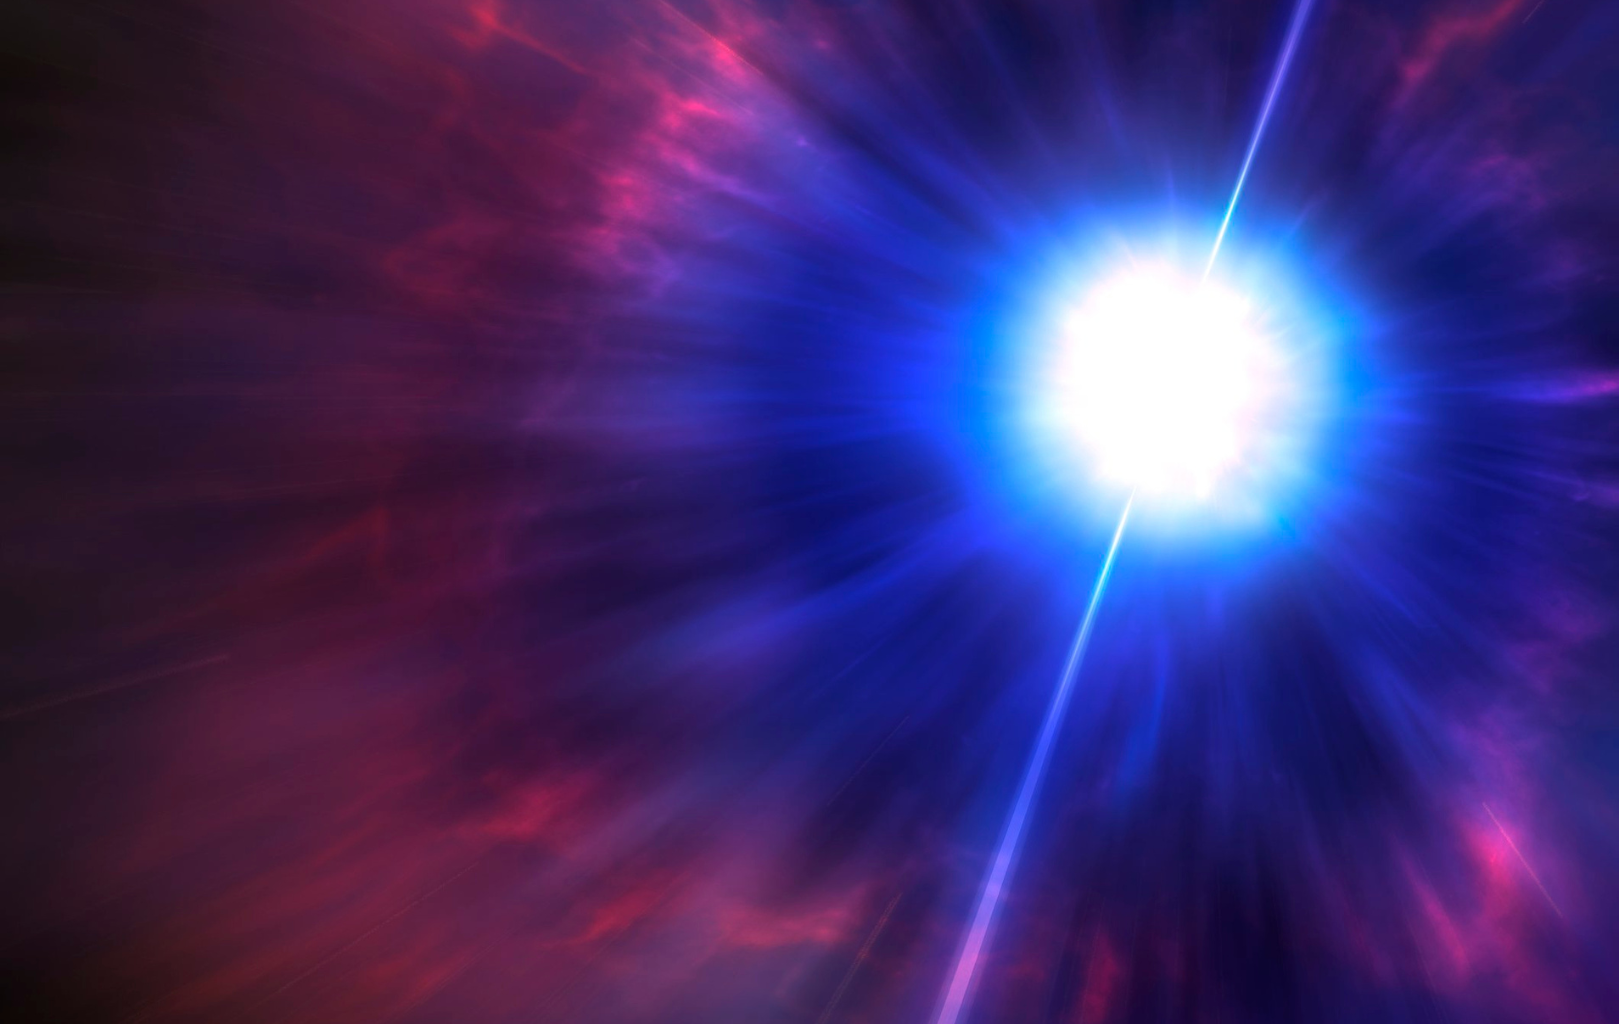 Unusual, long-lasting gamma-ray burst challenges theories about